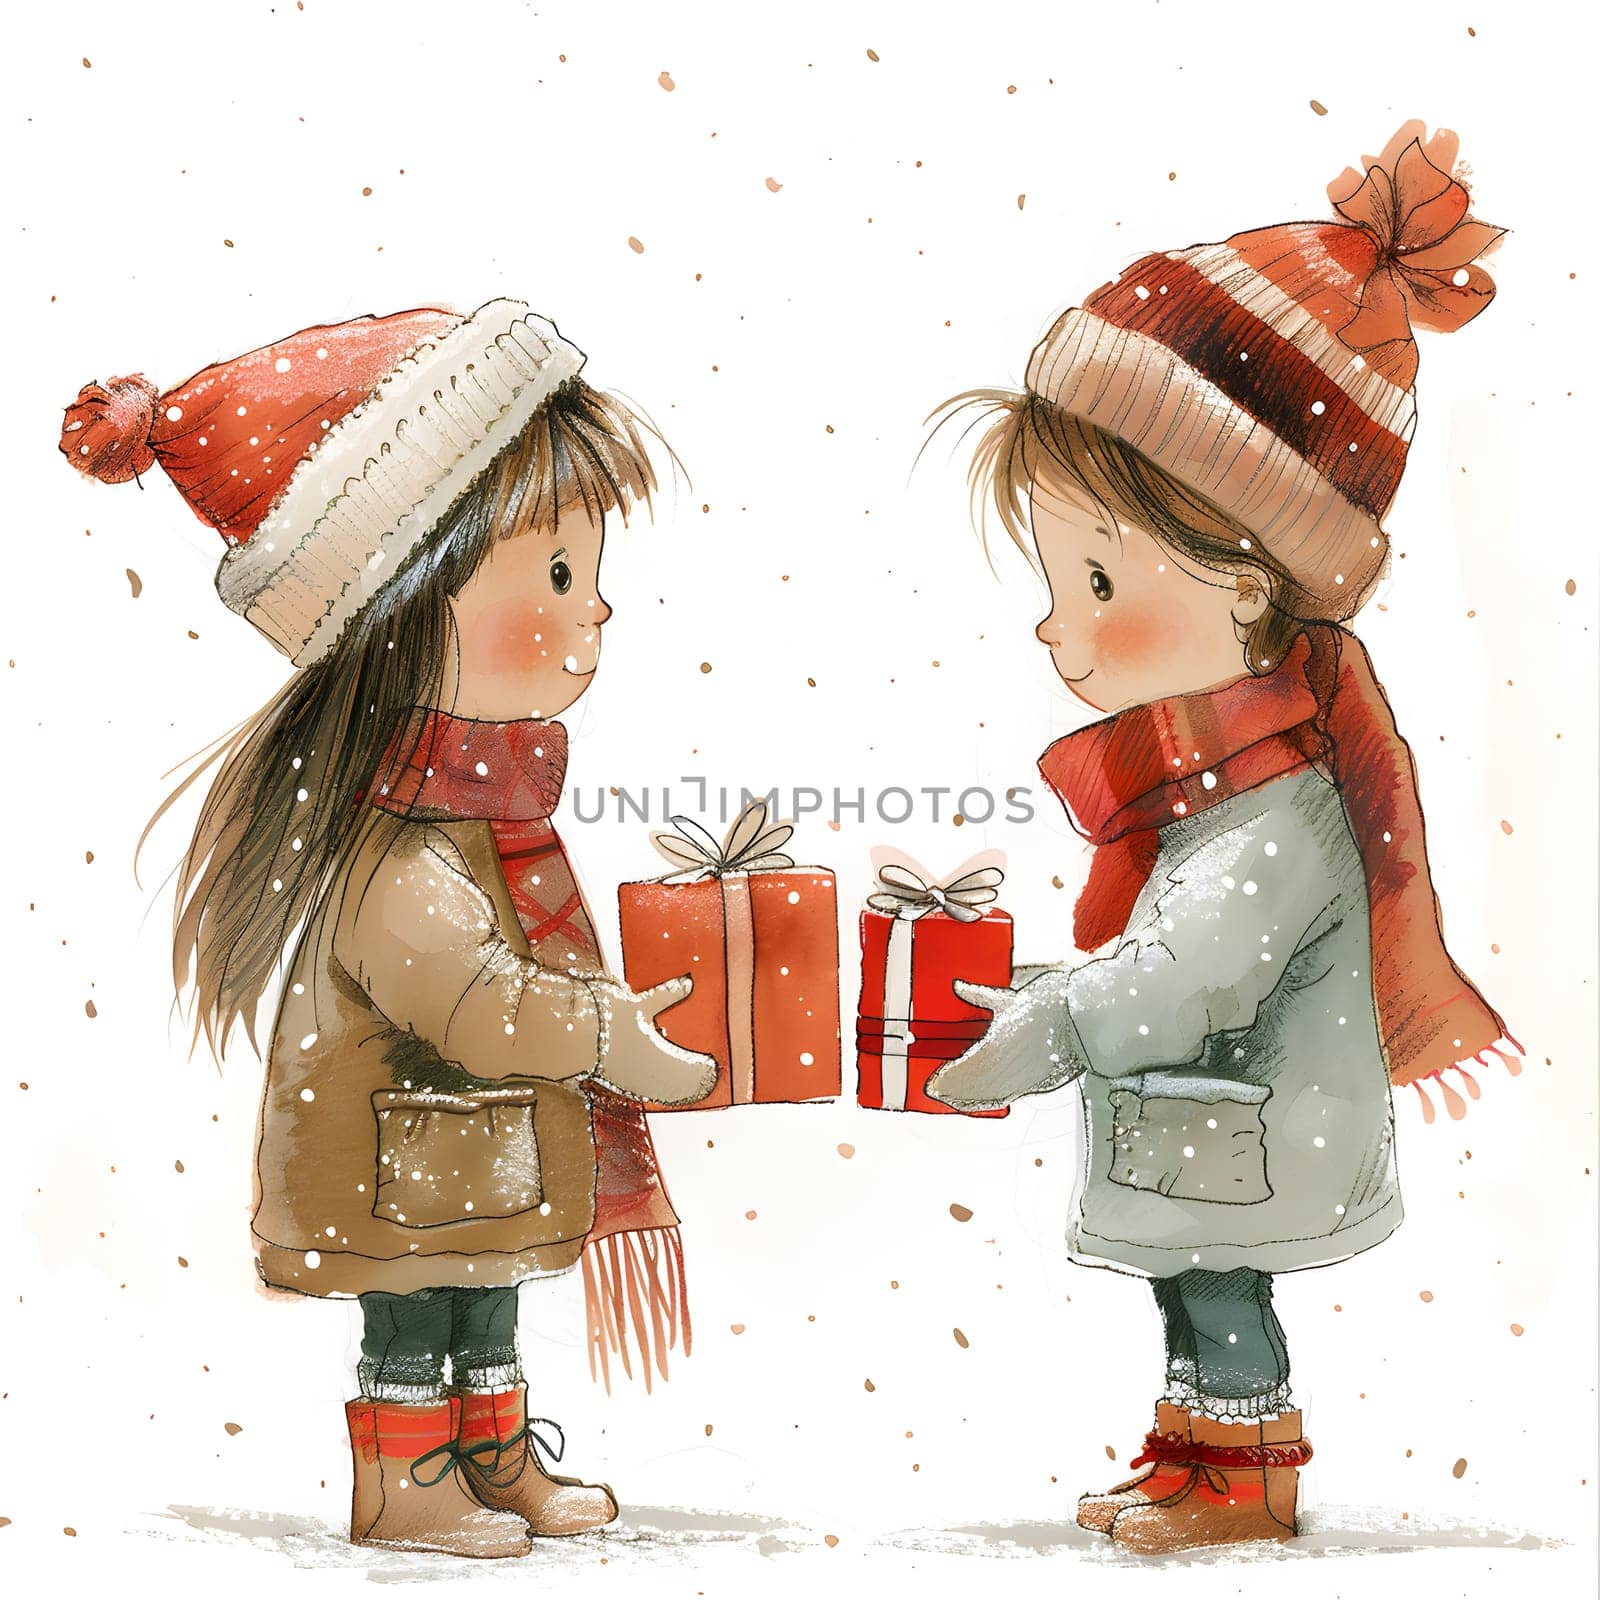 Girl sharing a winter hat as a gesture of happiness in the snowy event by Nadtochiy